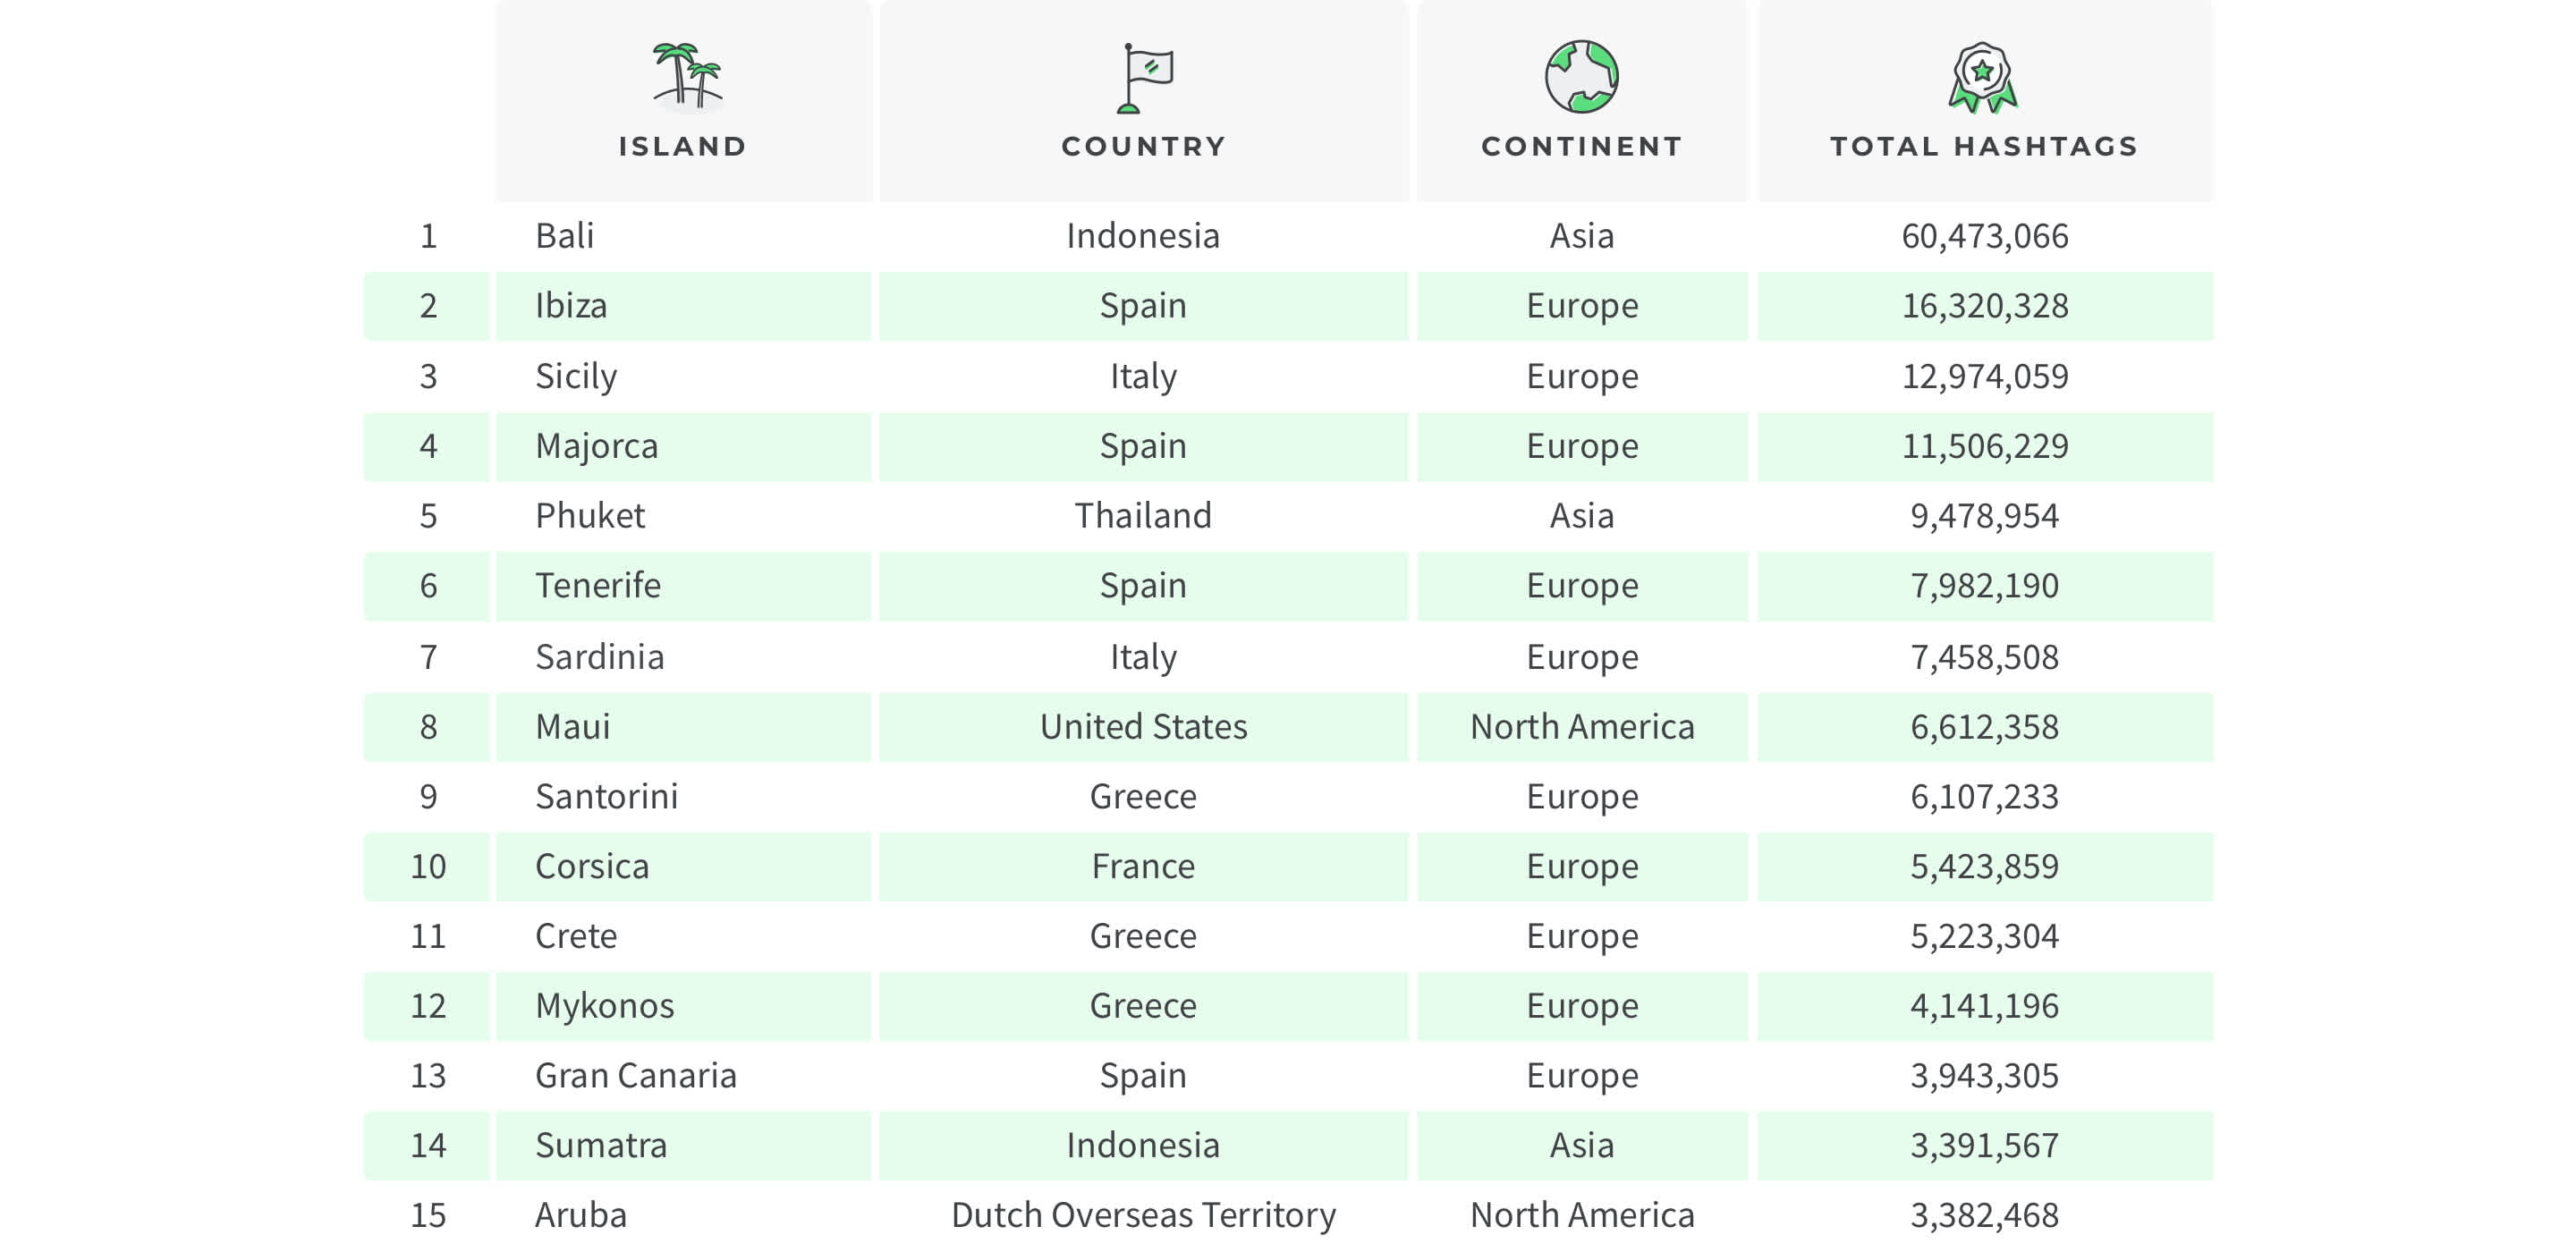 Table of the world's most instagrammed islands, rank 1-15